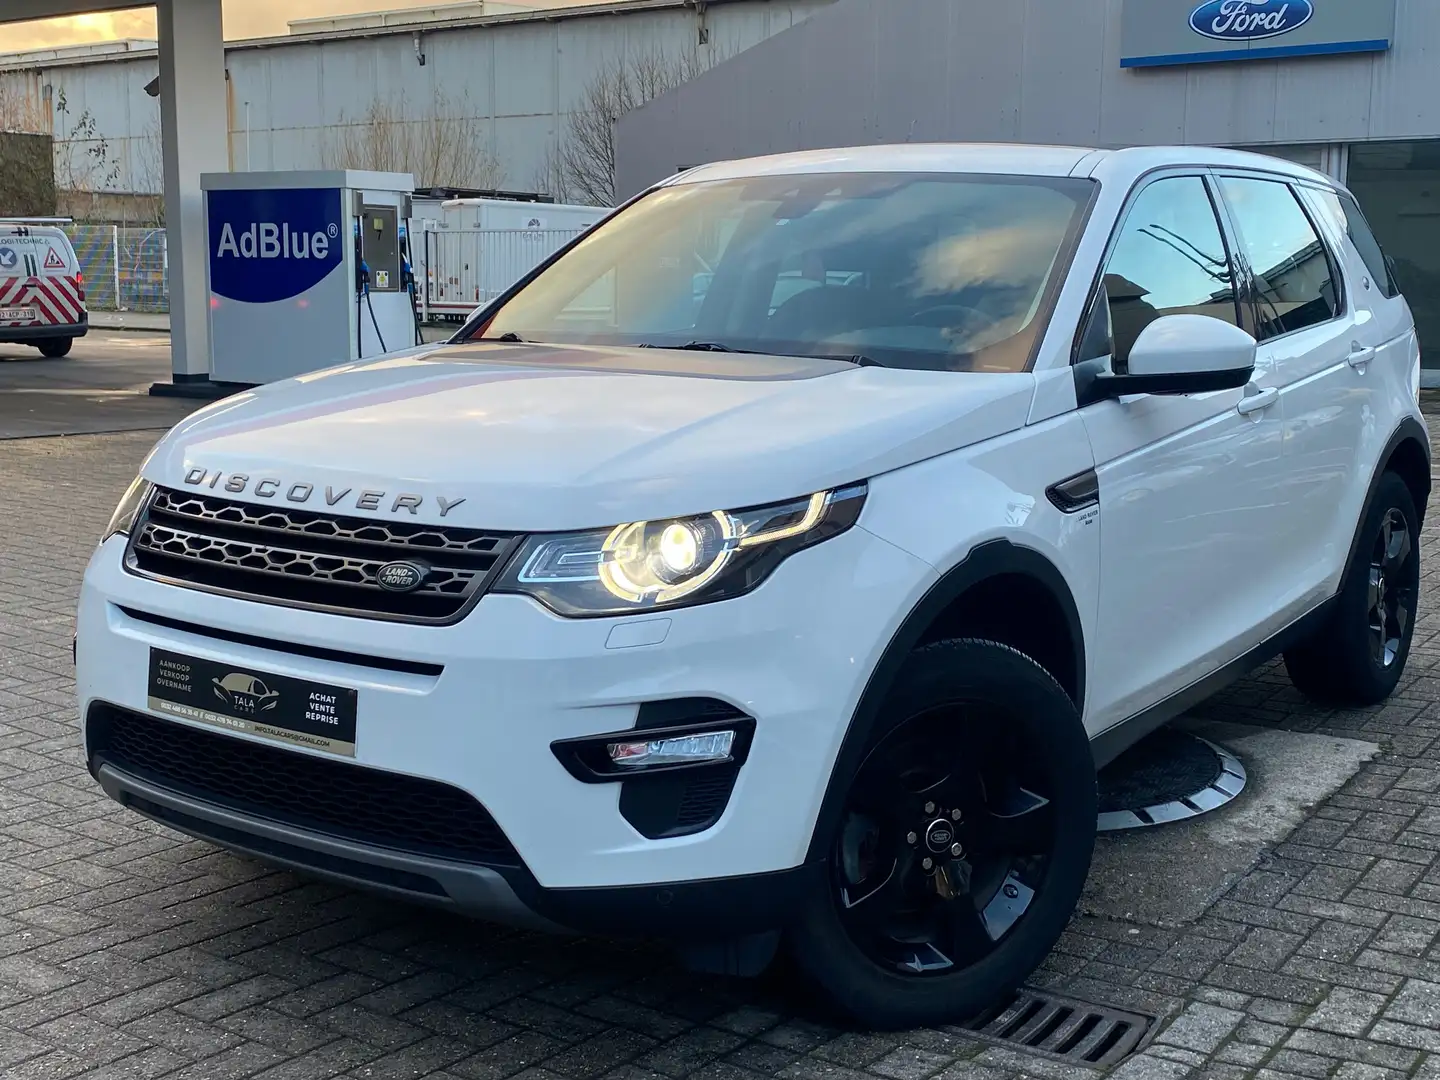 Land Rover Discovery Sport 2.0 TD4 CUIR/NAVI/CAMERA/NAVI/JANTES/BELLE VOITURE Blanc - 1